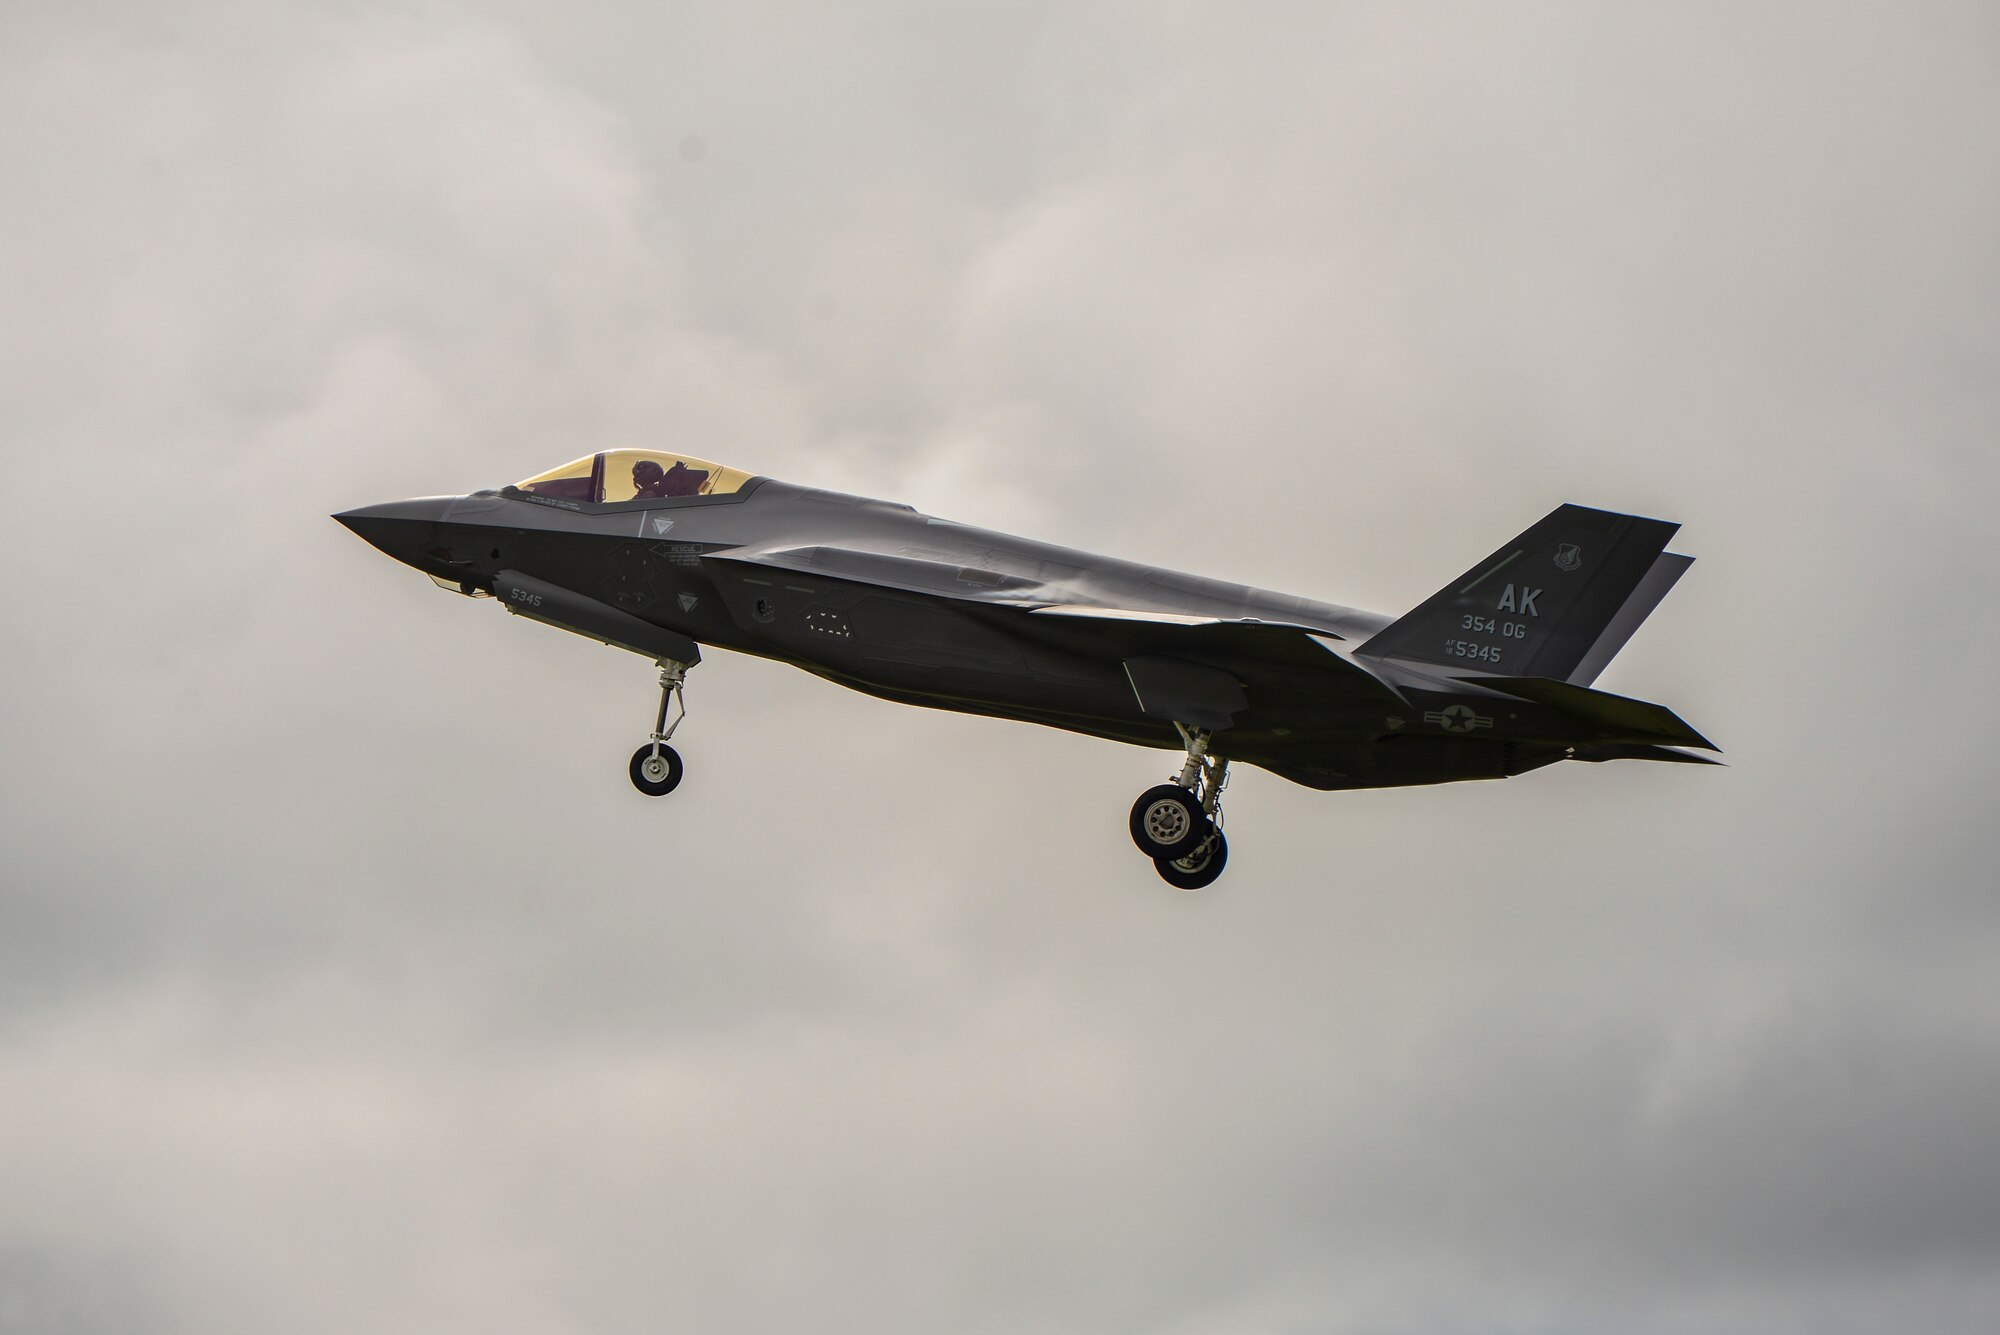 A U.S. Air Force F-35A Lightning II assigned to the 356th Fighter Squadron lands on the Fairbanks International Airport runway at Fairbanks, Alaska, June 24, 2020.